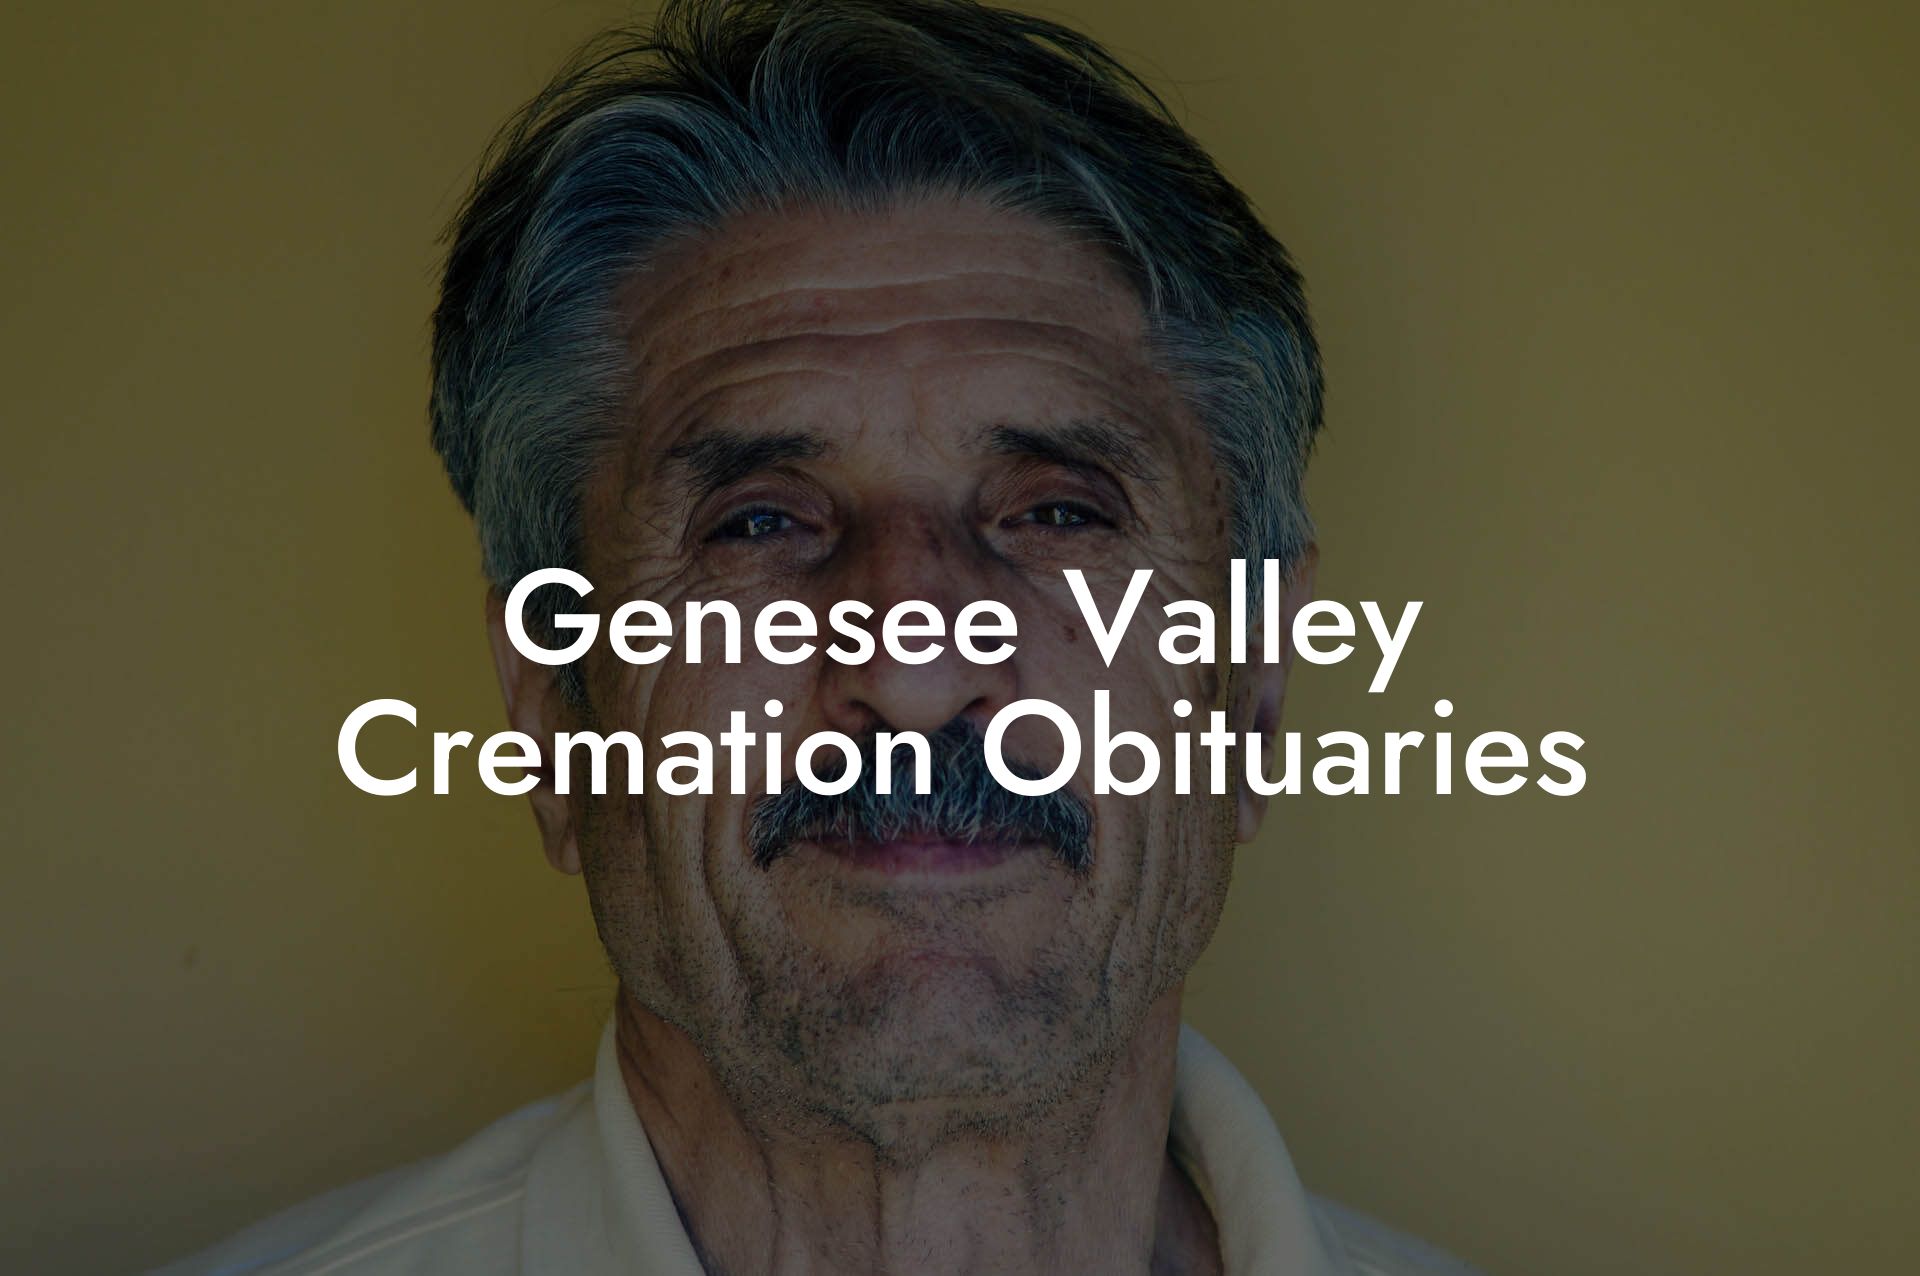 Genesee Valley Cremation Obituaries